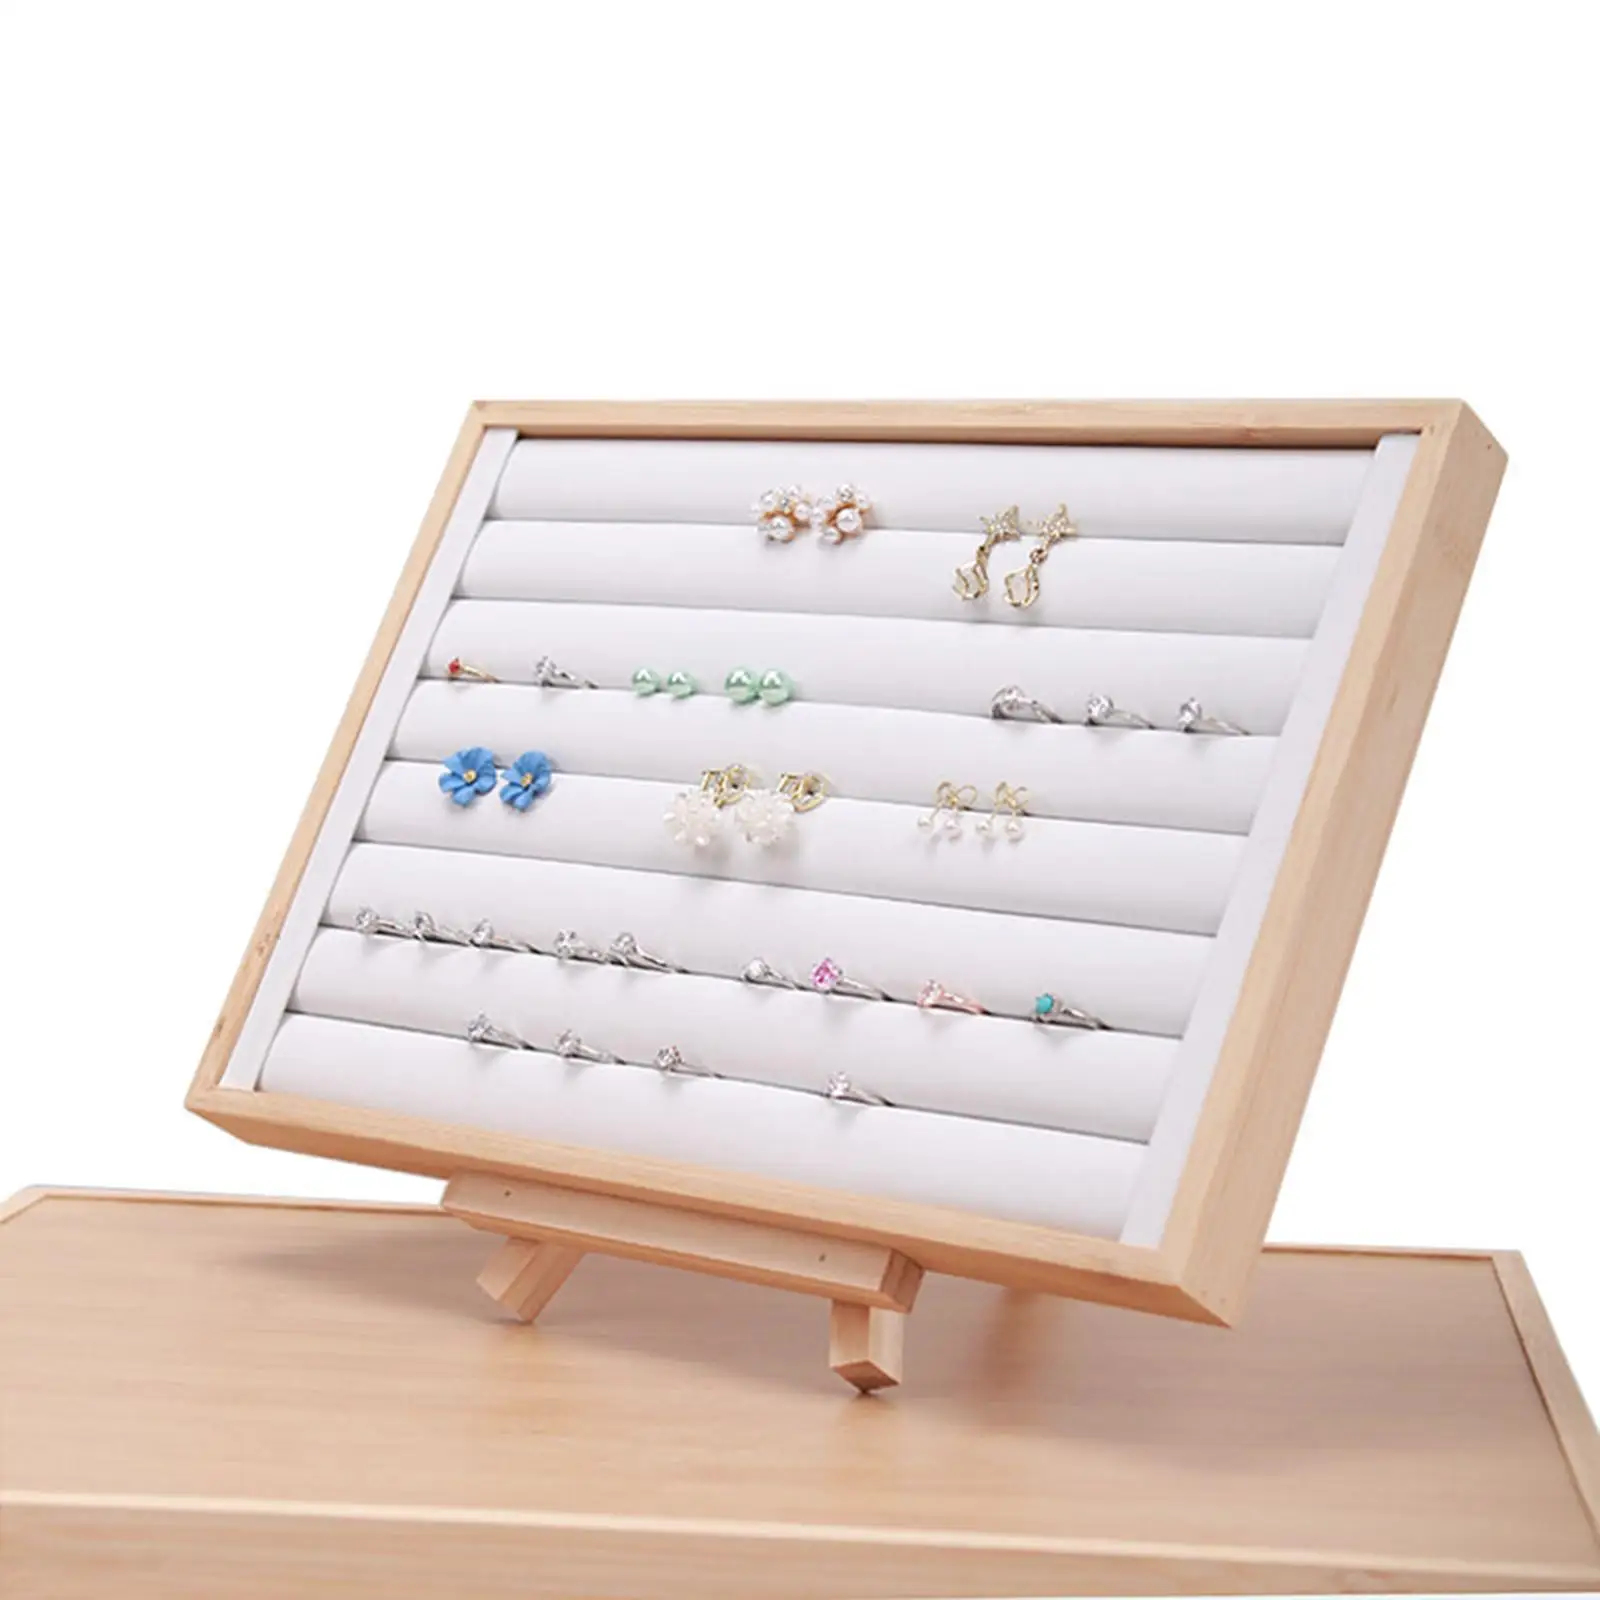 

Jewelry Organizer Tray Jewelry Props Showcase Ring Organizer Stand Storage Box for Shop Photography Dresser Living Room Cufflink